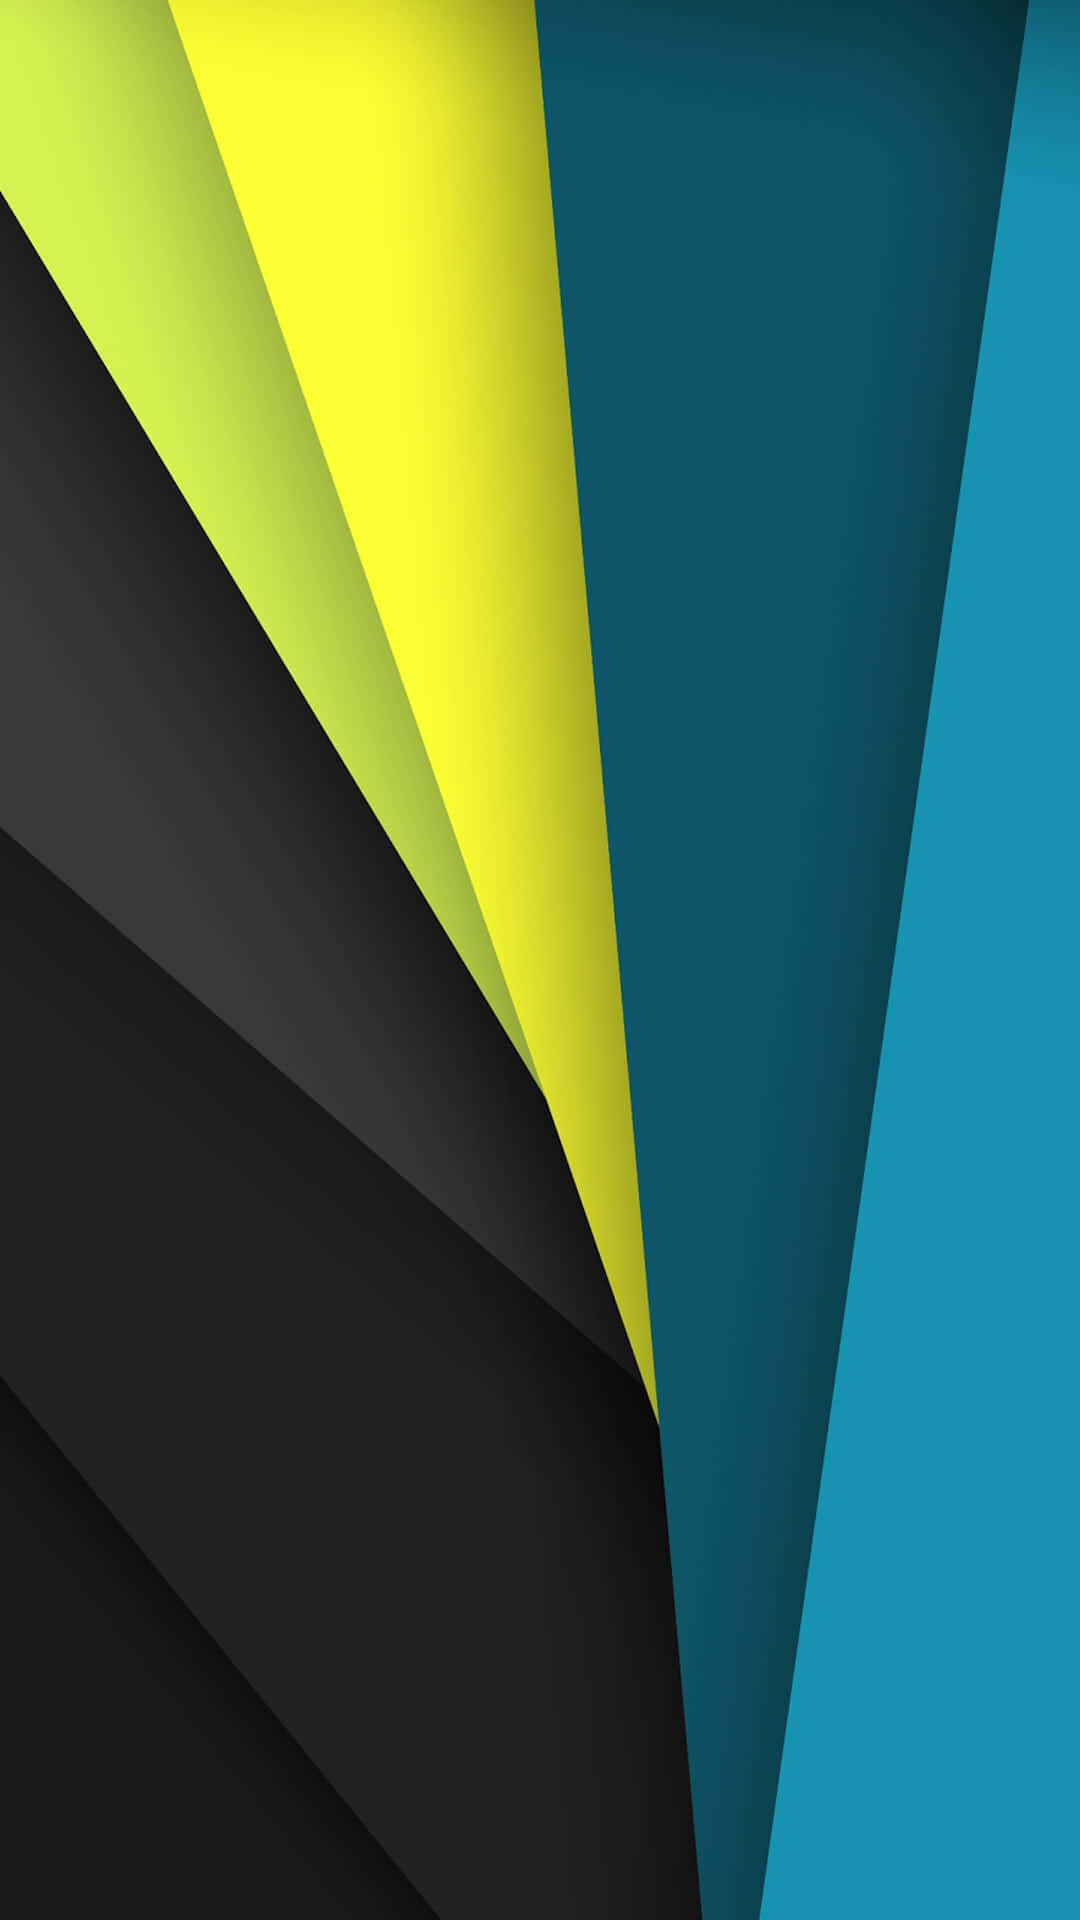 A Black And Yellow Abstract Background With A Yellow And Blue Triangle